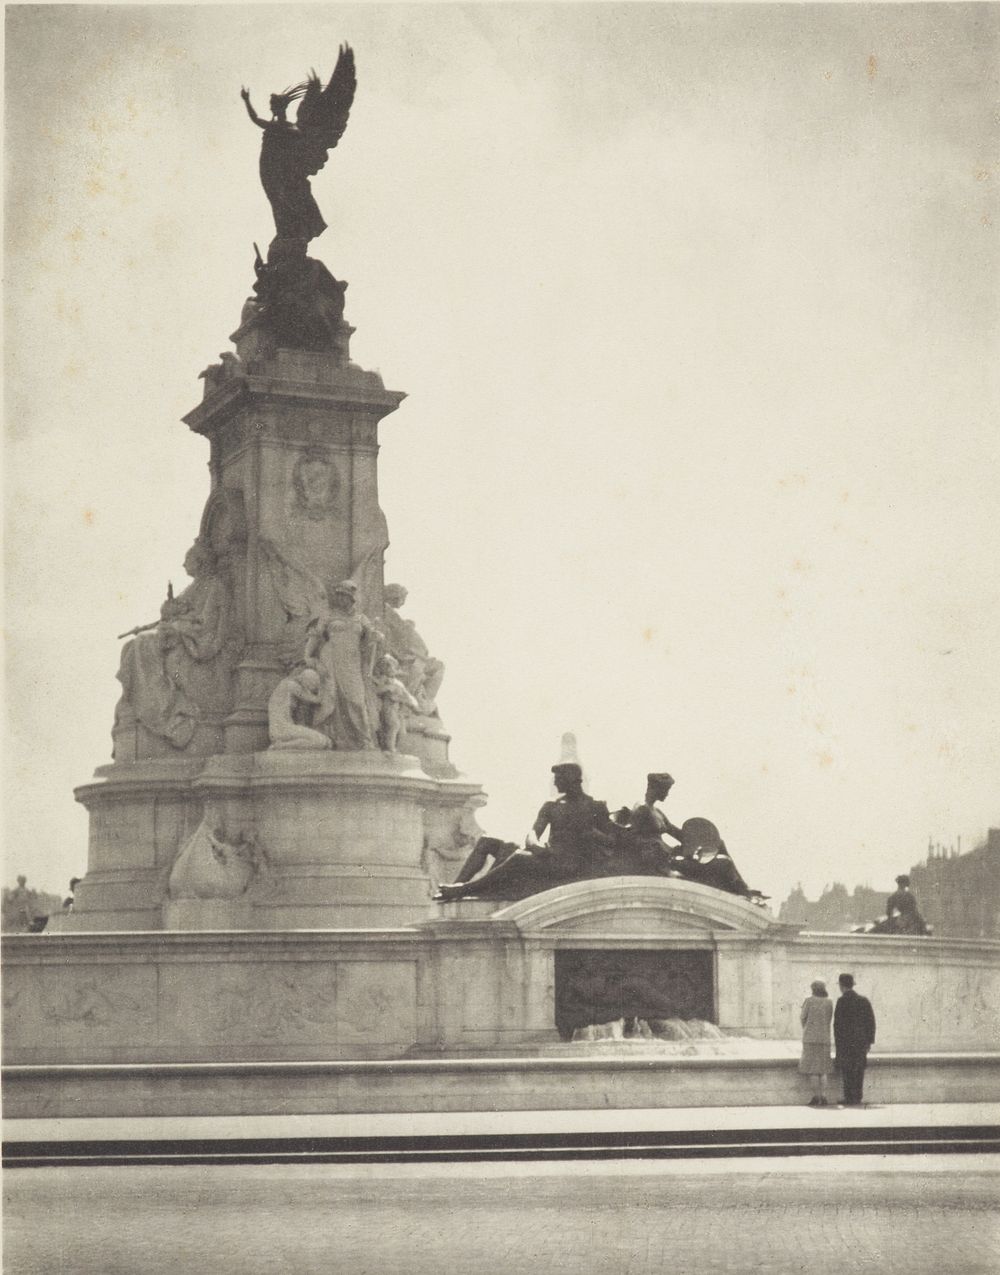 Queen Victoria's monument. From the album: Photograph album - London (1920s) by Harry Moult.